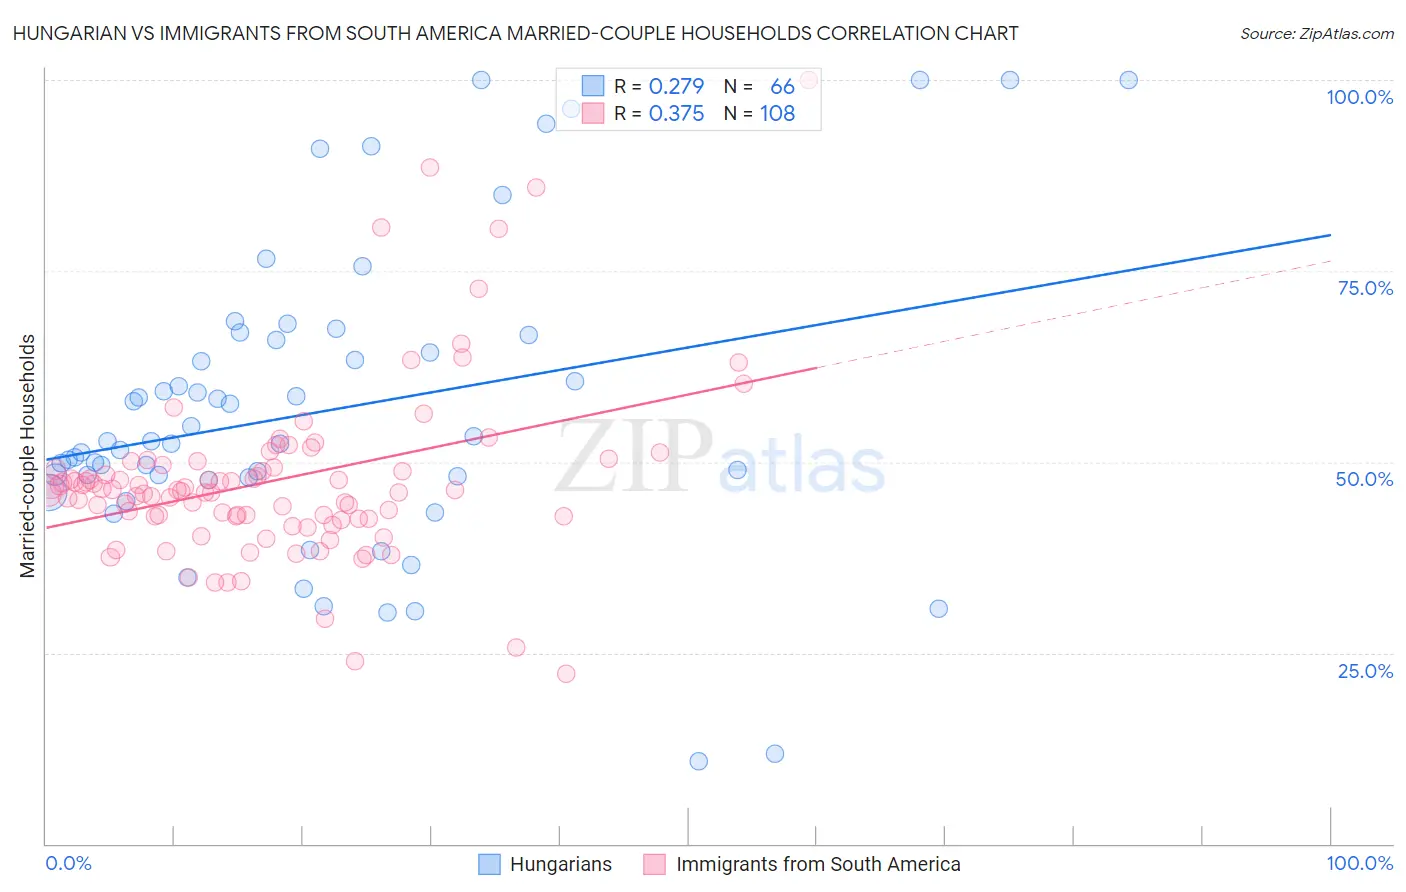 Hungarian vs Immigrants from South America Married-couple Households